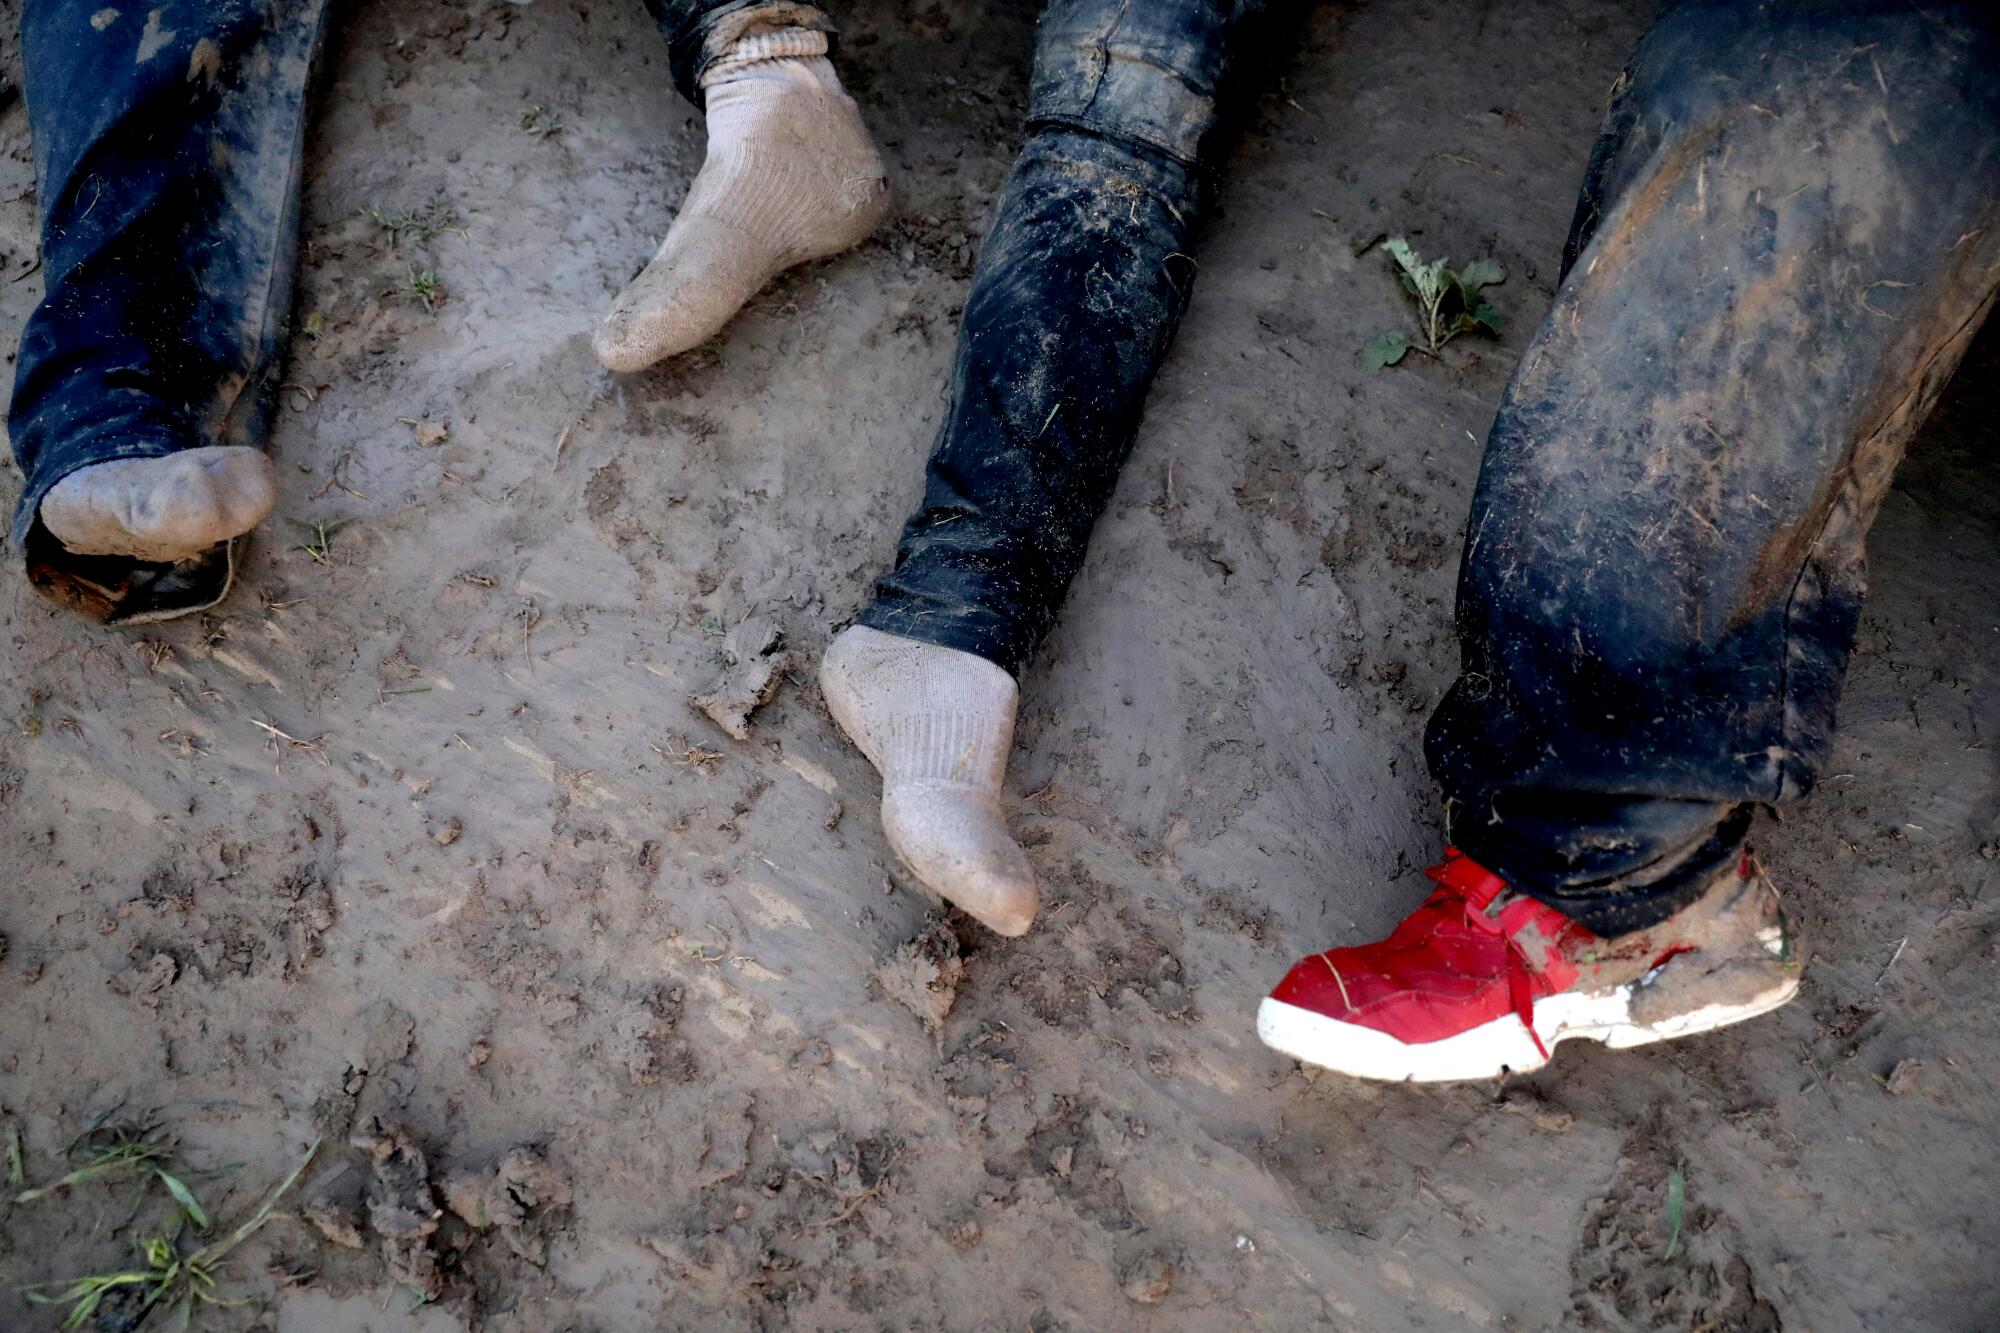 Mud caked migrants collapse after crossing the U.S.-Mexico border in McAllen, Texas.